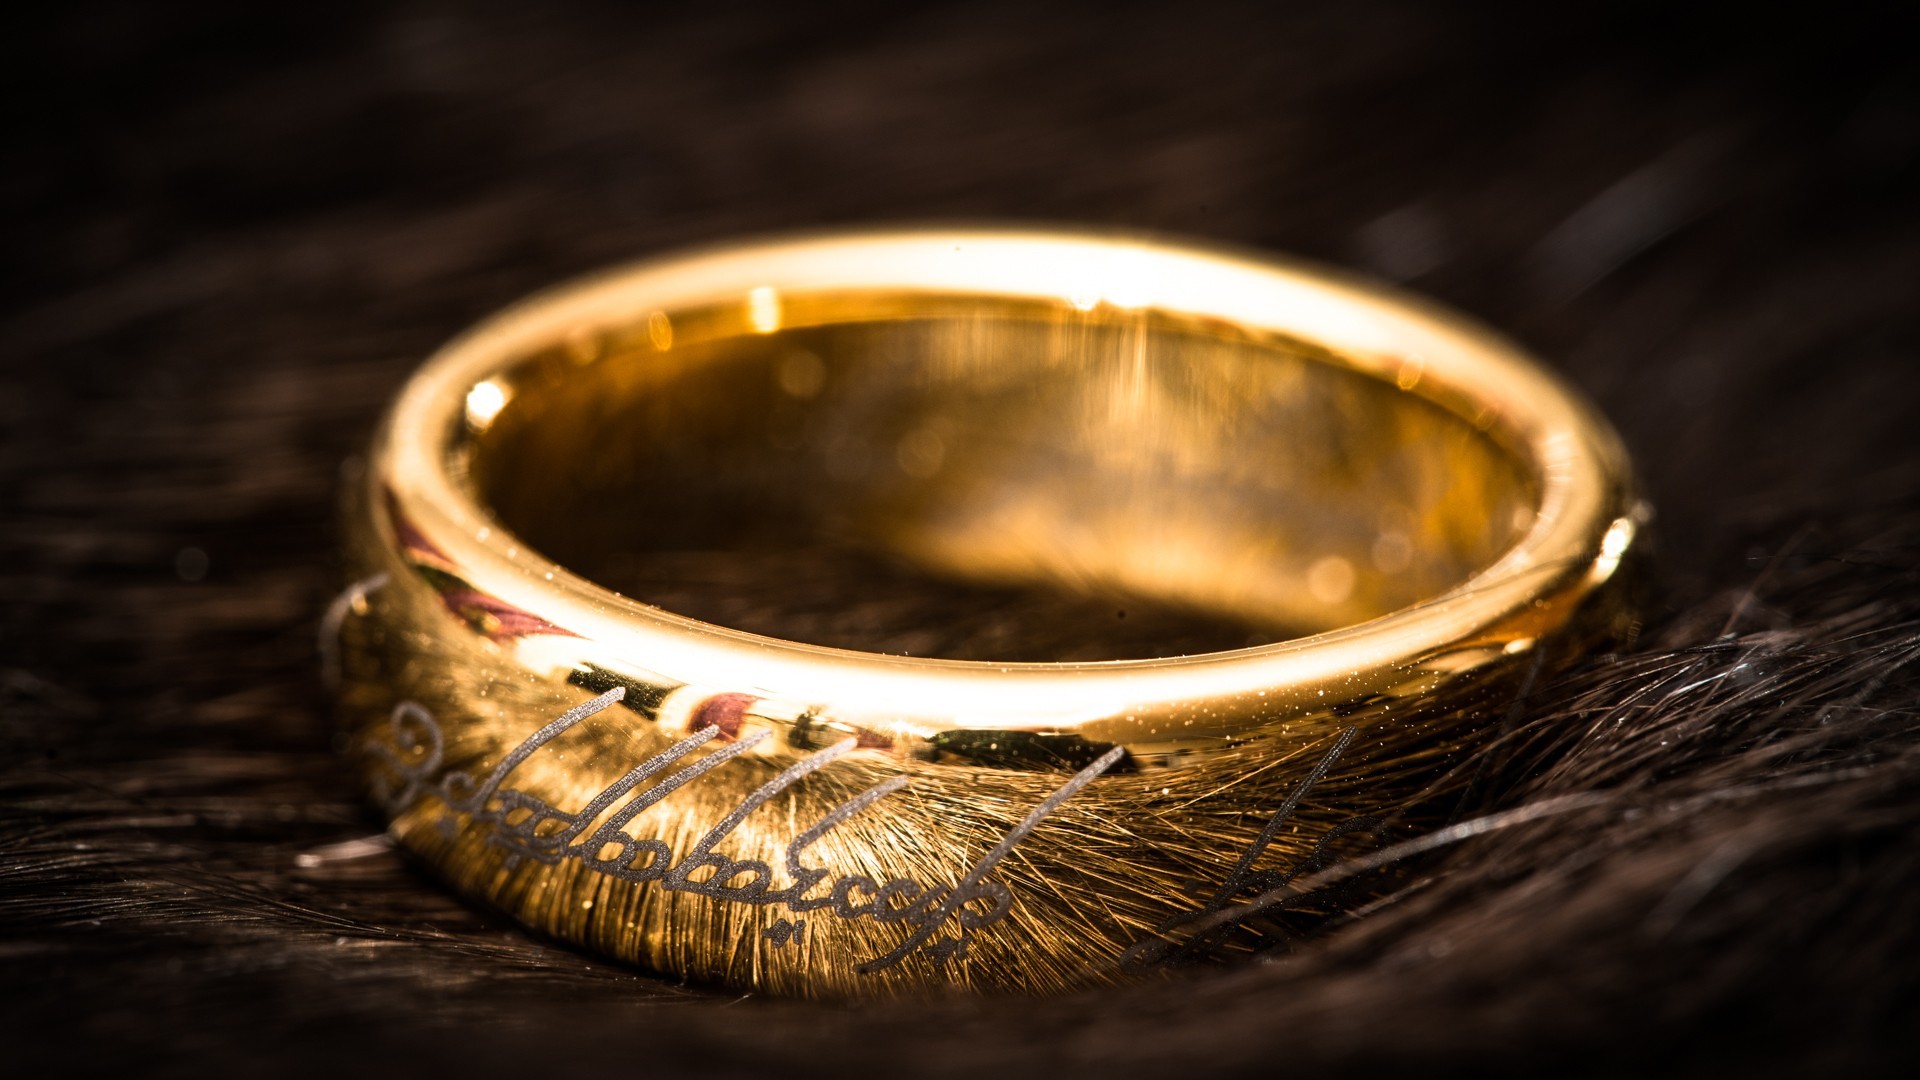 General 1920x1080 The Lord of the Rings rings depth of field The One Ring macro movies